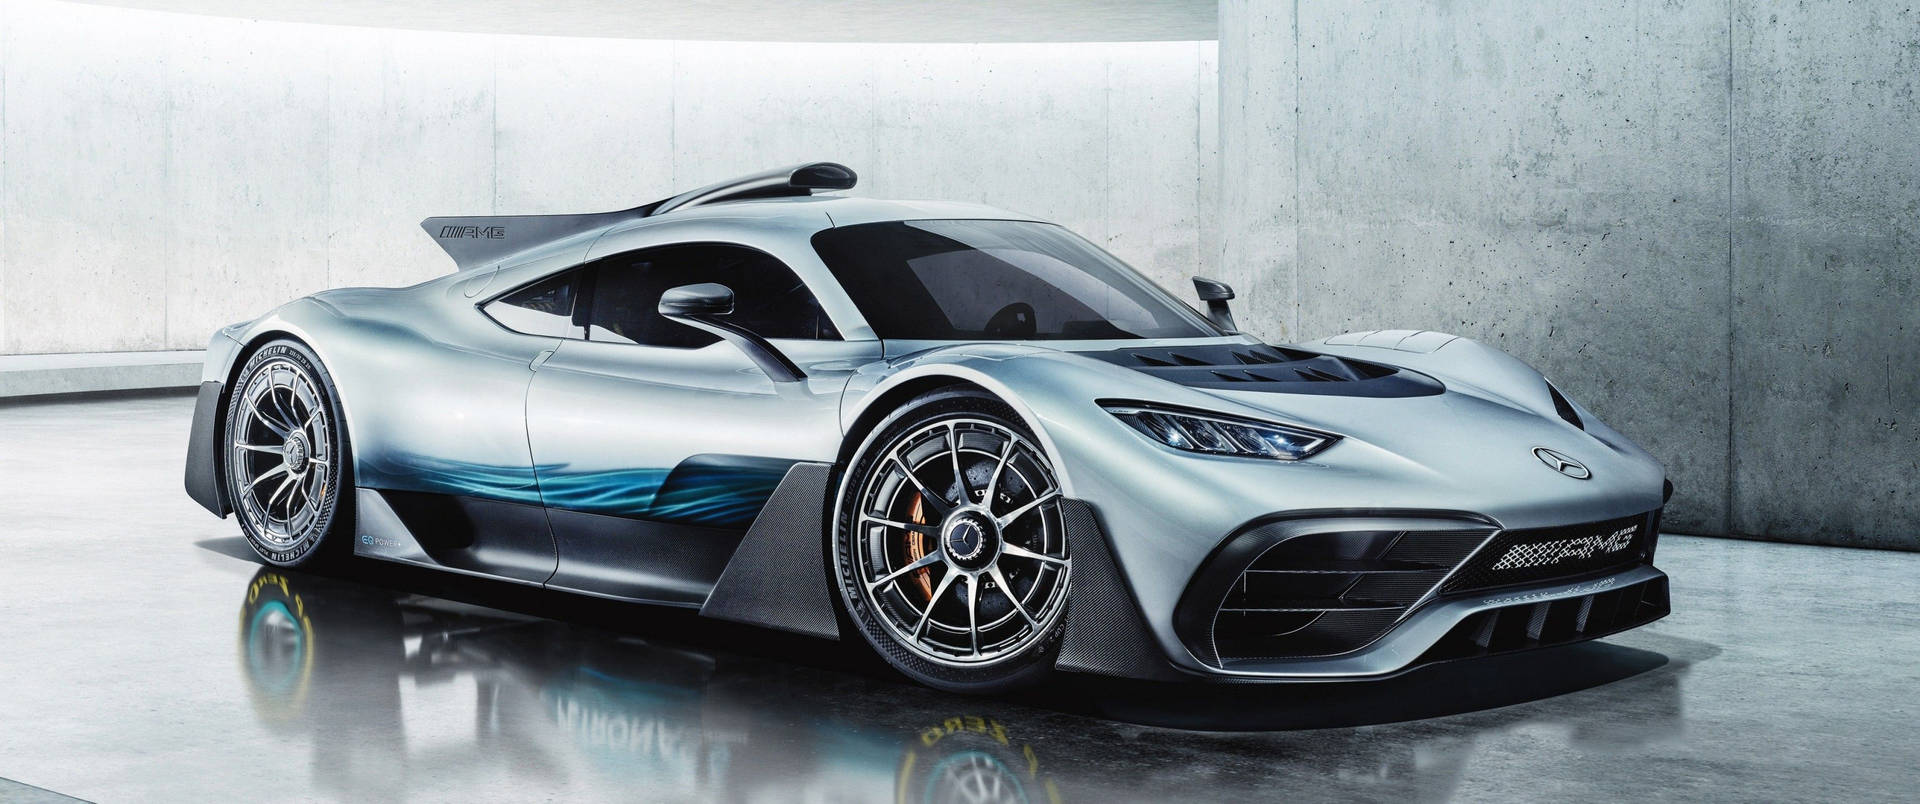 3440x1440 Car Mercedes-amg Project One Background